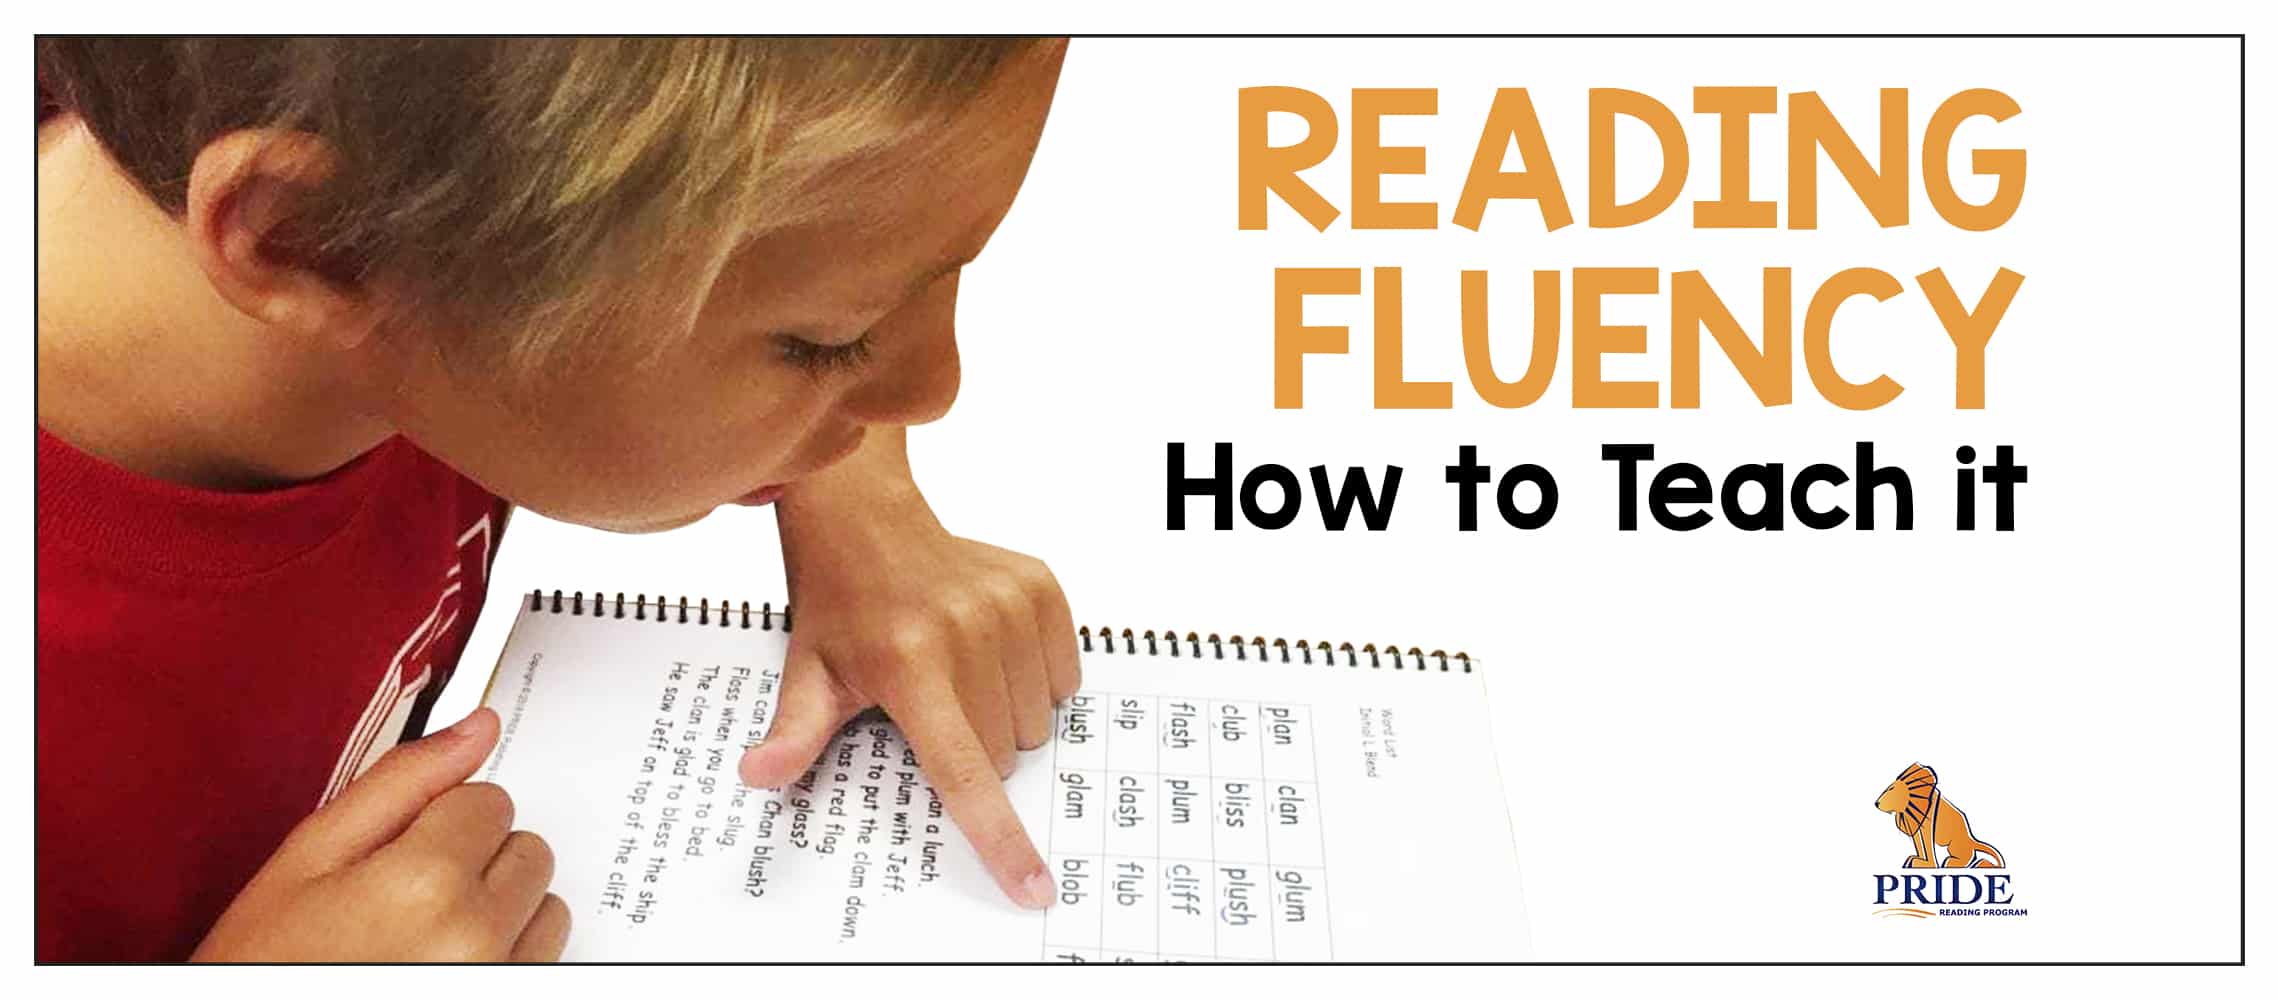 reading-fluency-how-to-teach-it-structured-literacy-pride-reading